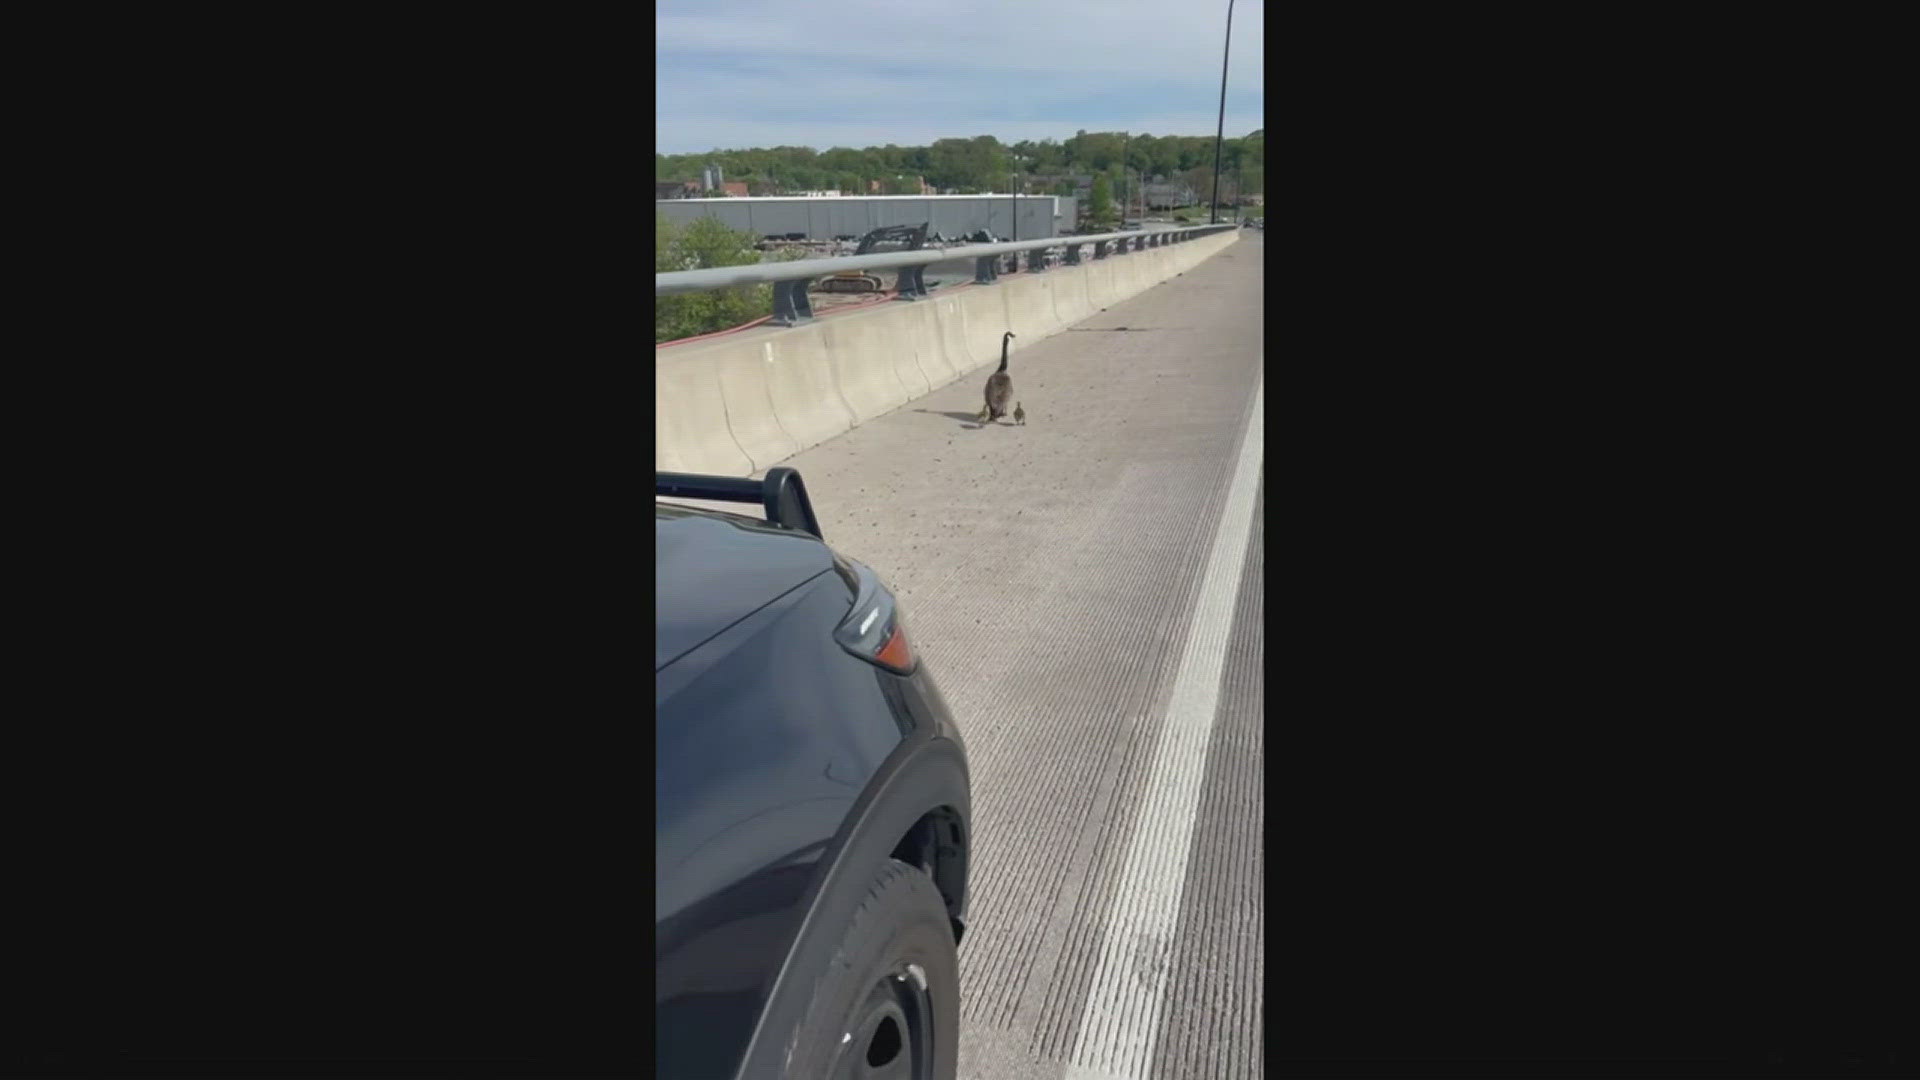 Two officers escorted the geese to safety.